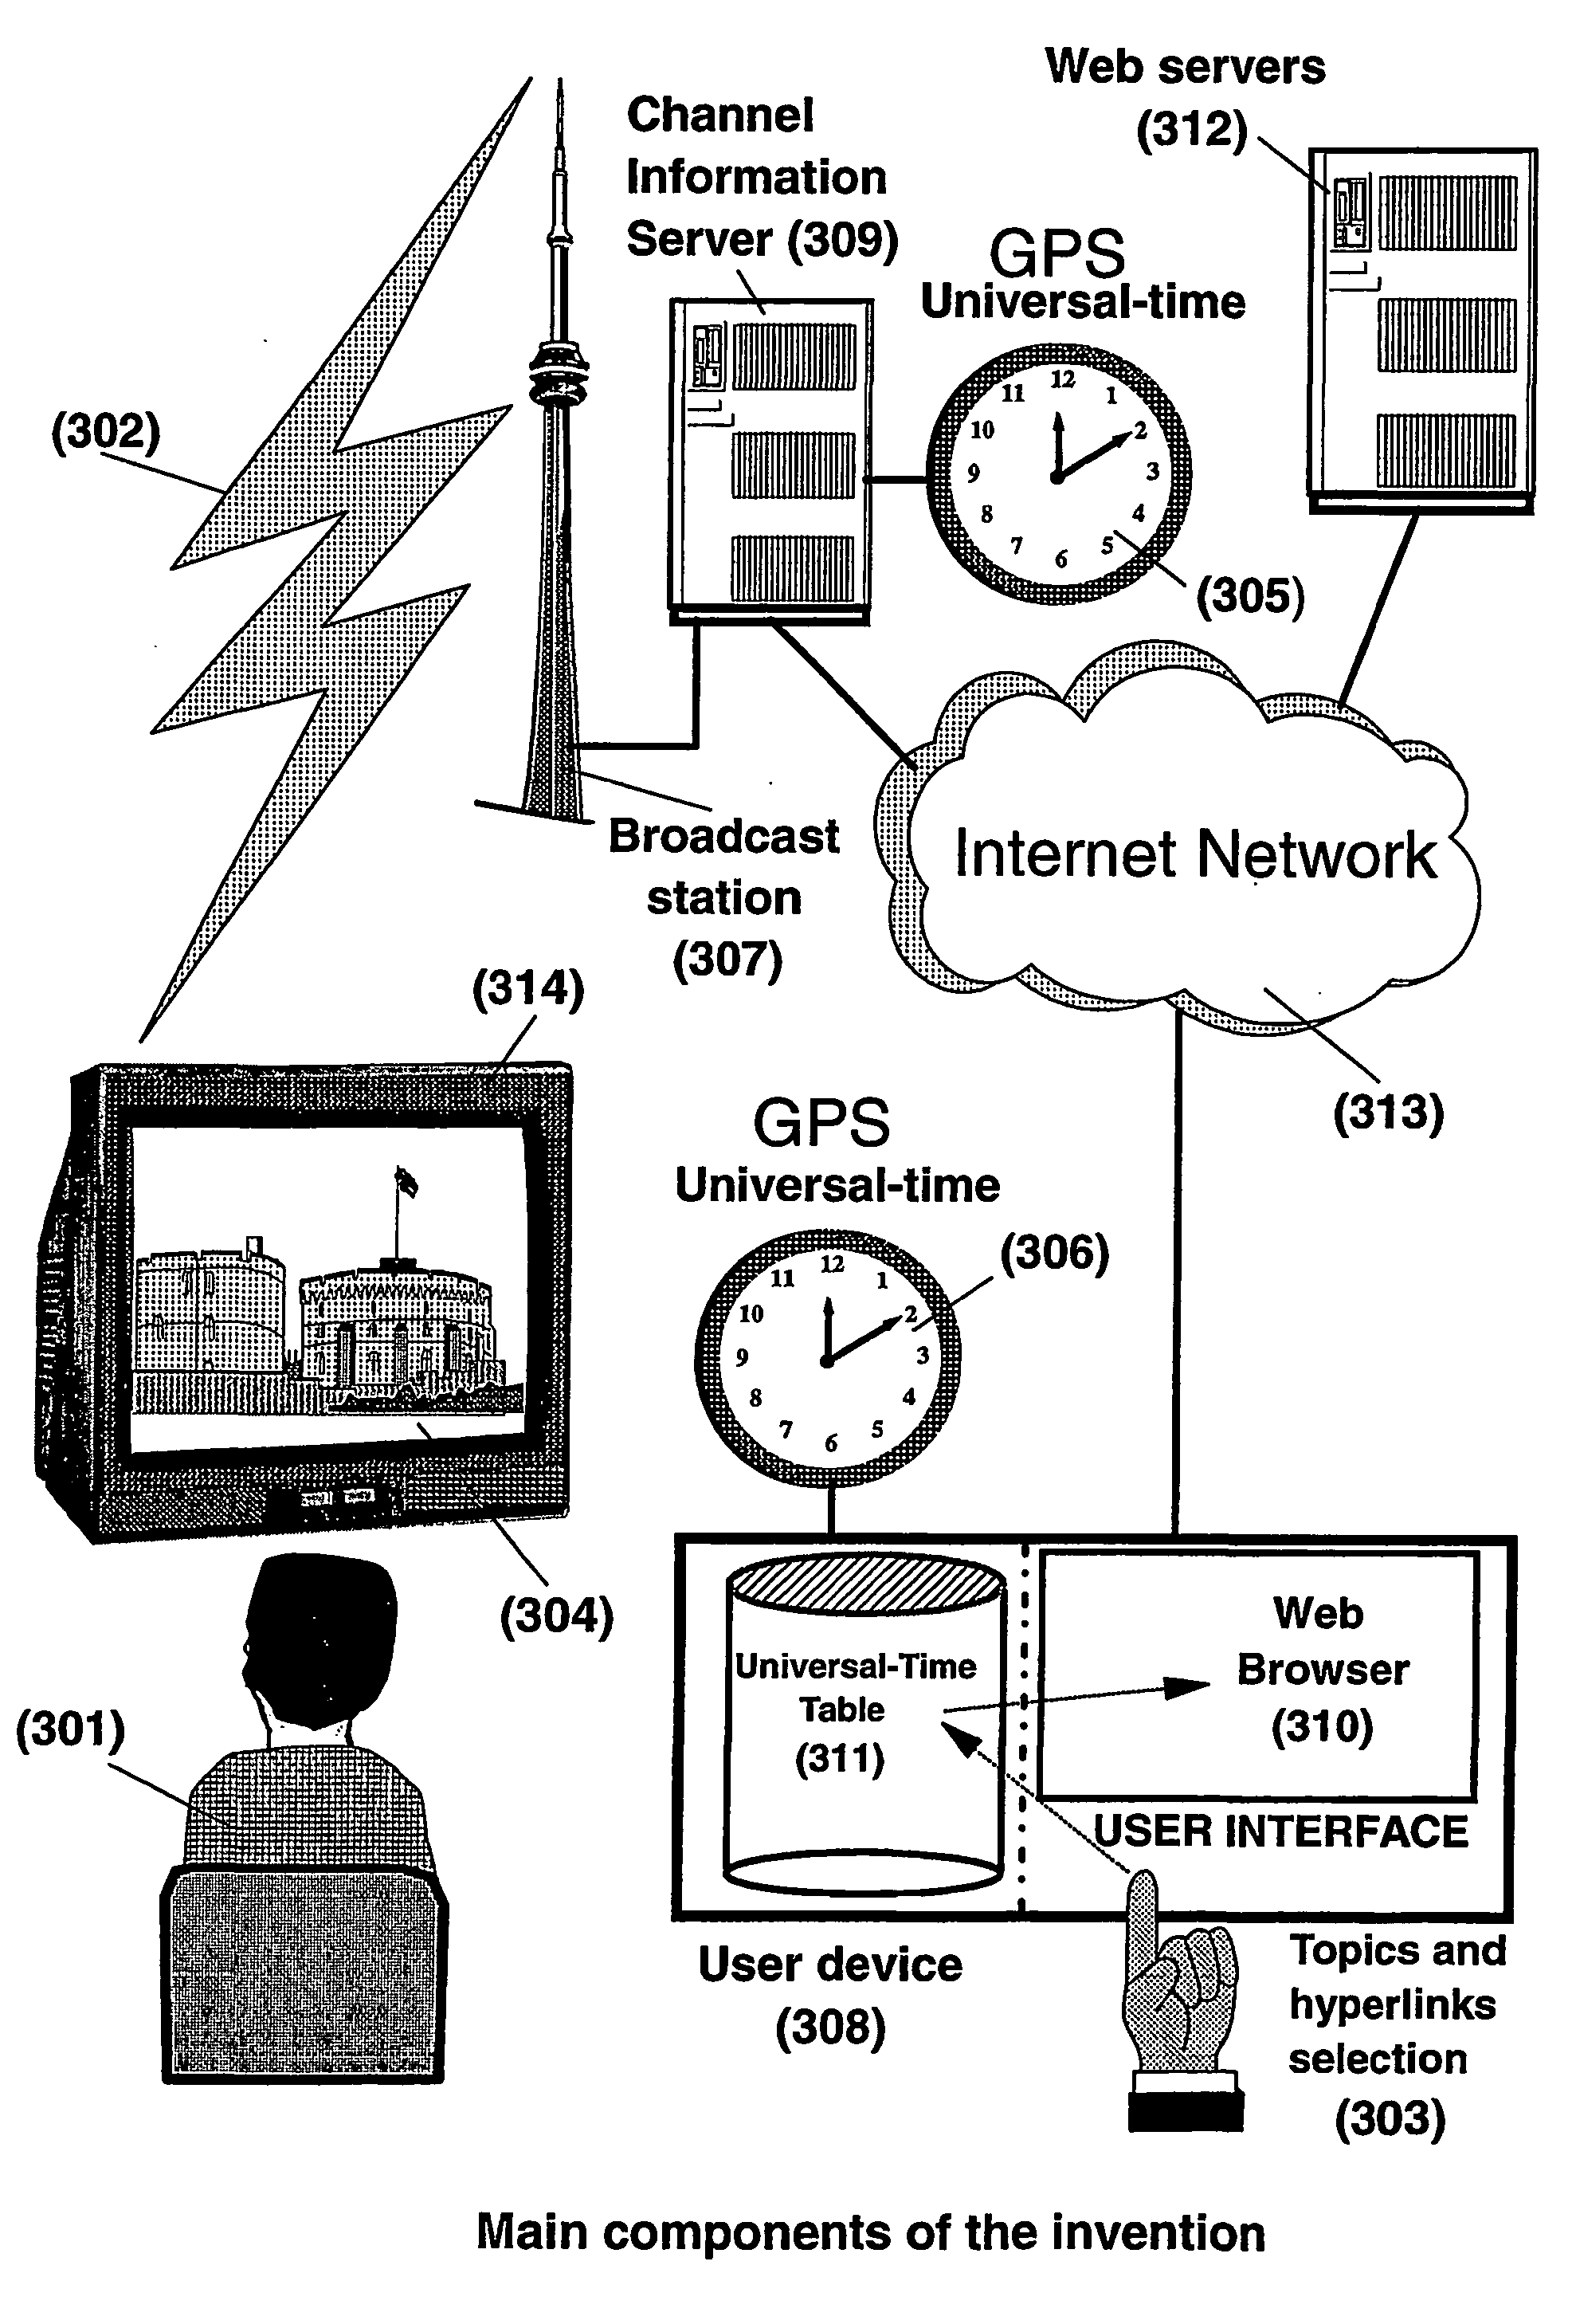 System and method for enhancing broadcast programs with information on the world wide web